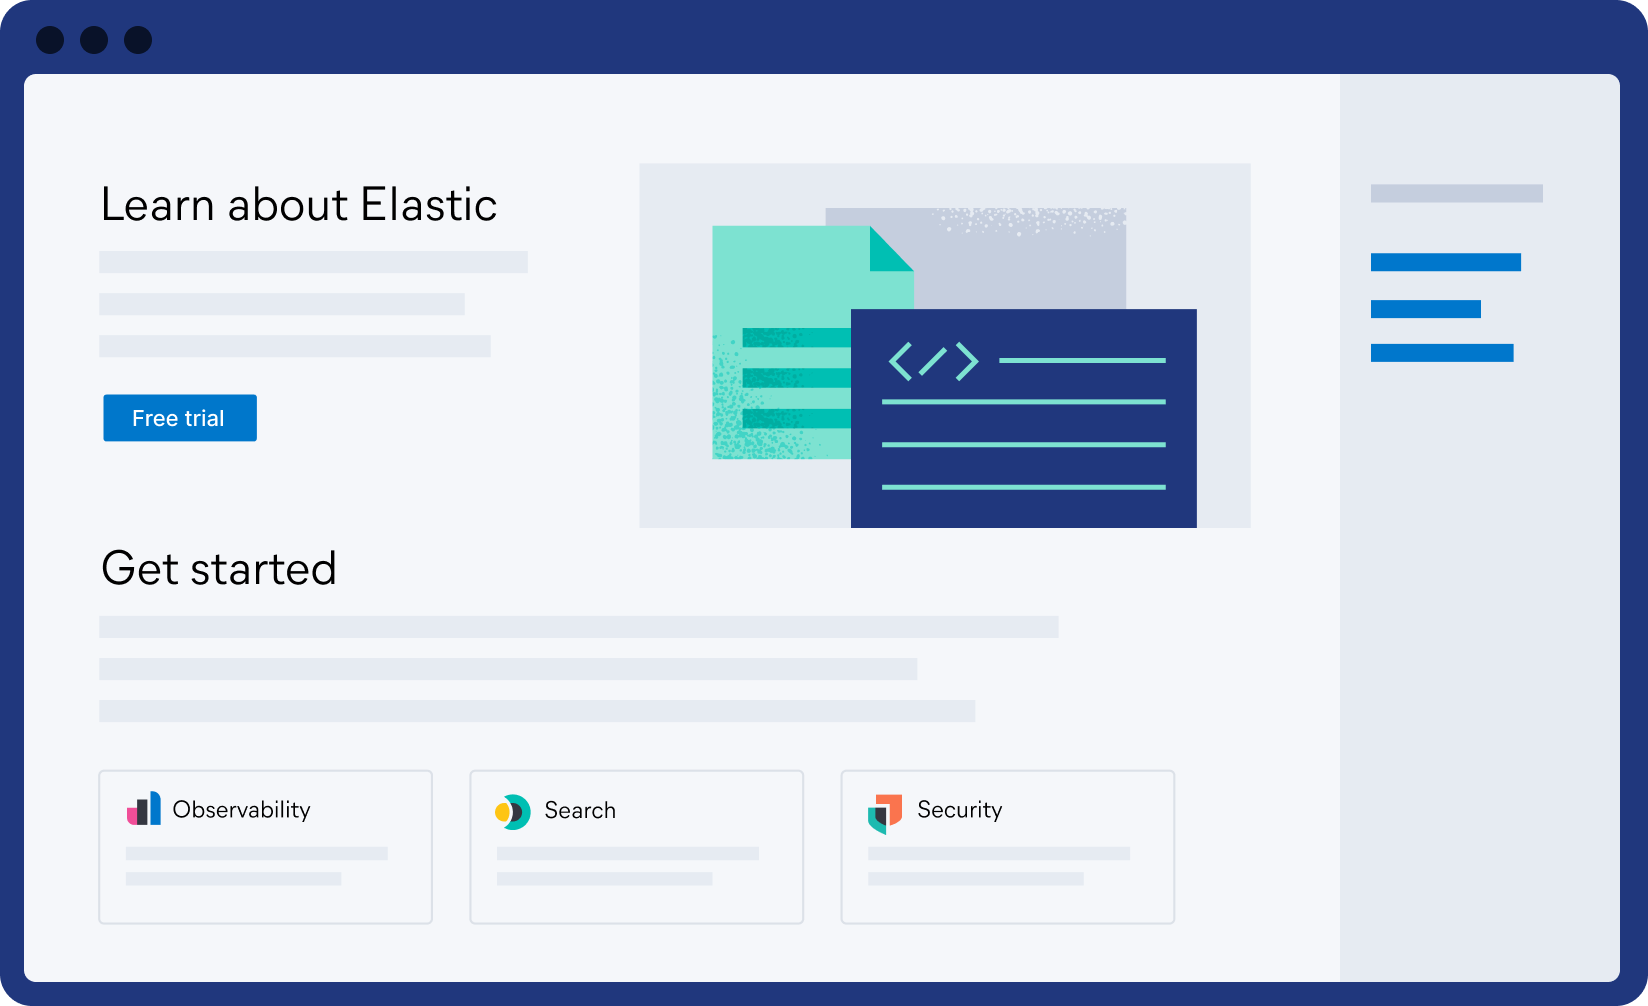 https://images.contentstack.io/v3/assets/bltefdd0b53724fa2ce/blt759473c9edee13cb/64d52c4aabde6a141f51e0fd/illustration-learn-about-elastic.png